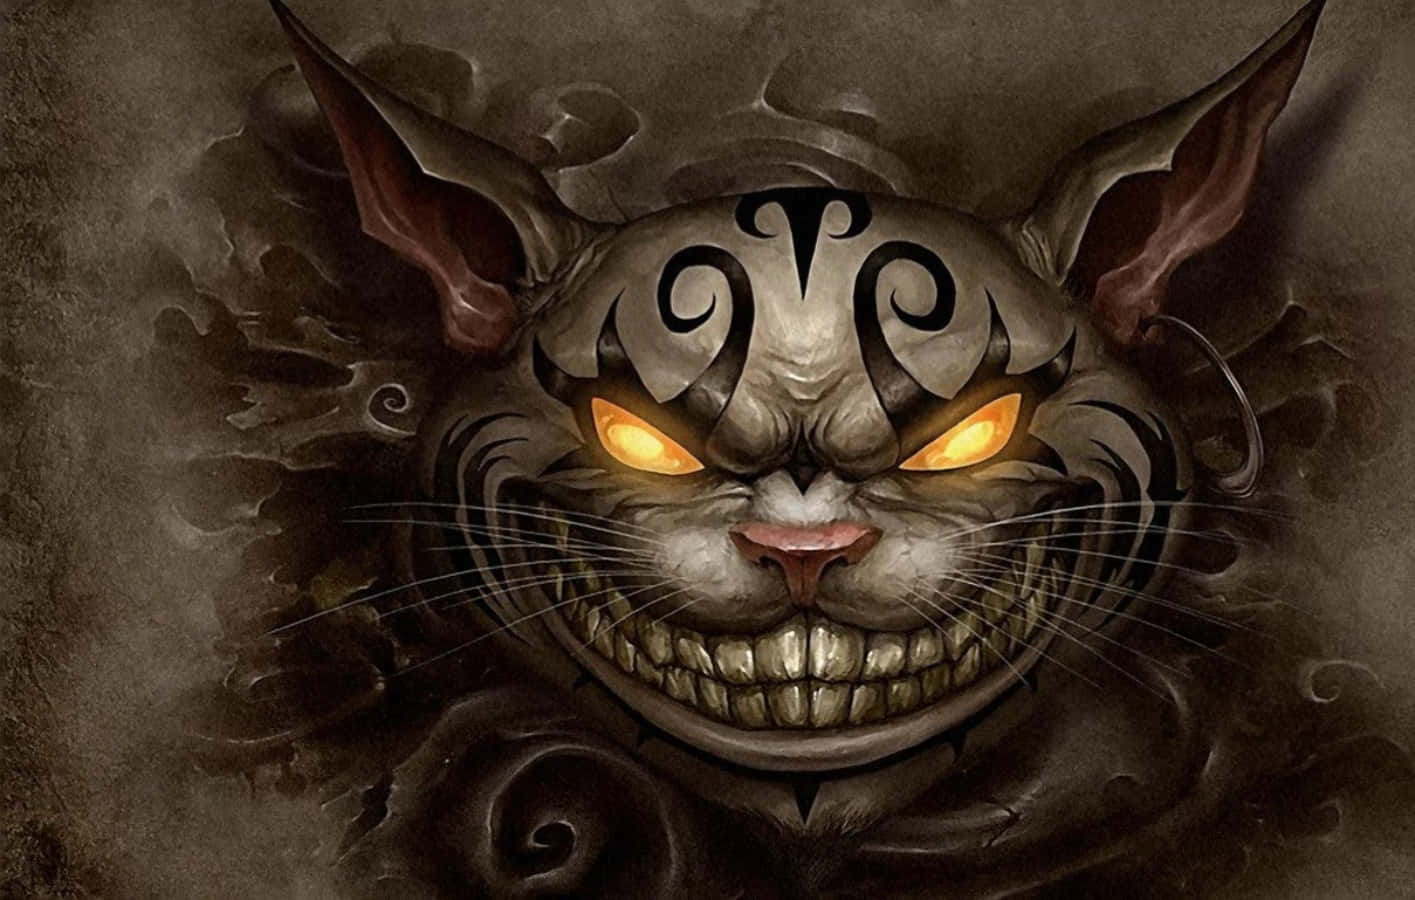 Smiling slyly, the Cheshire Cat fills the room with its mischievous charm.